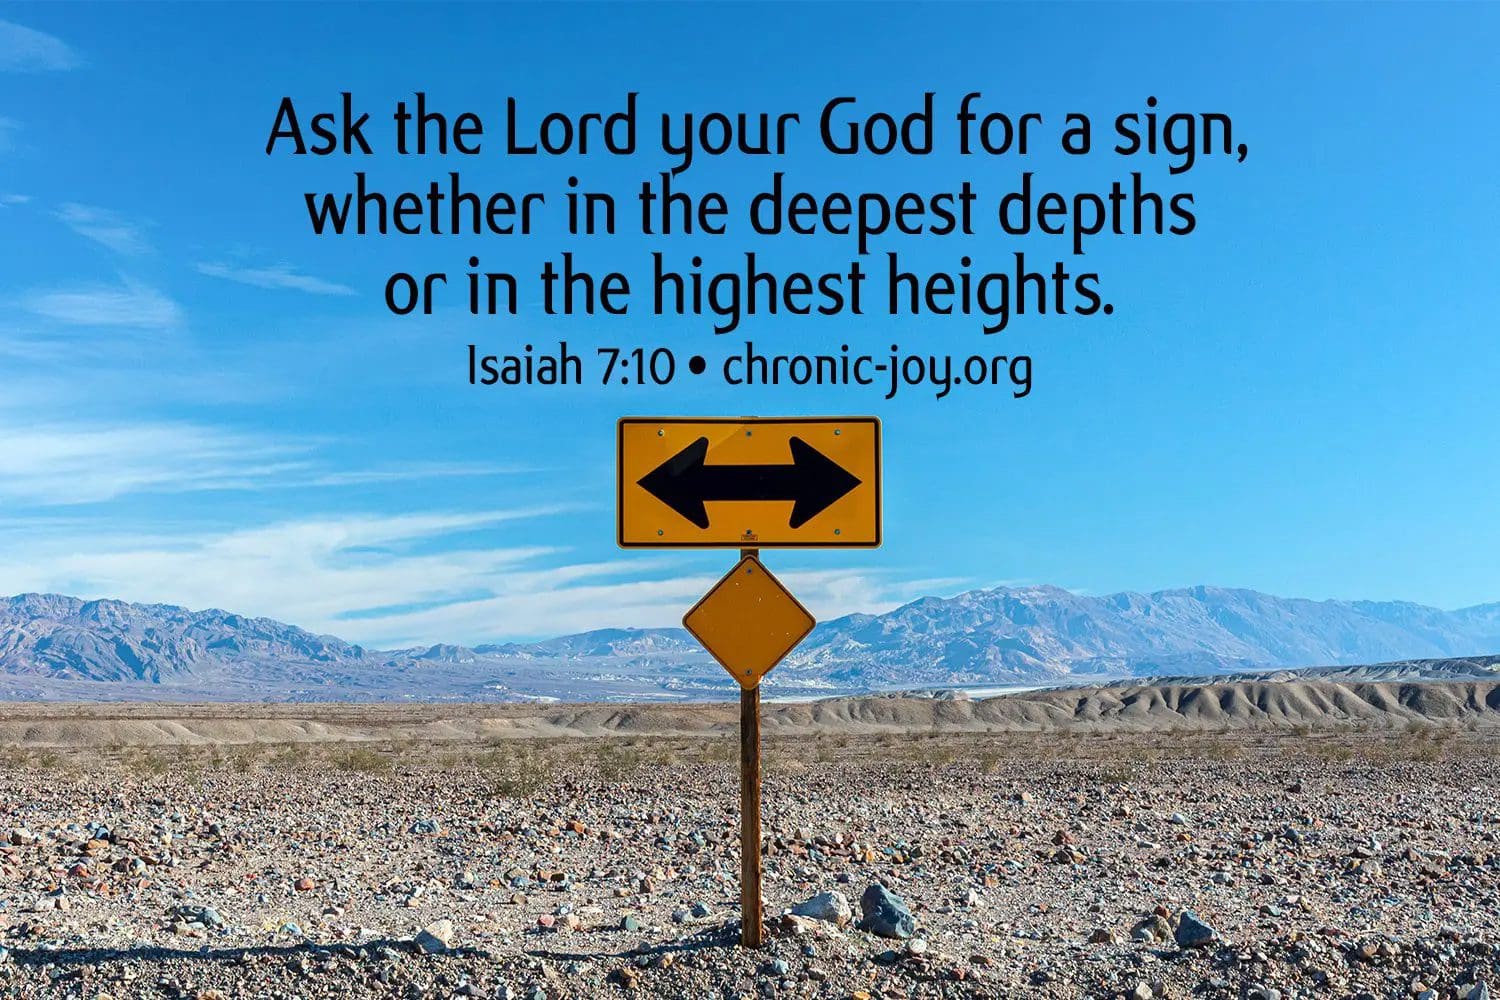  "Ask the Lord your God for a sign, whether in the deepest depths or in the highest heights." Isaiah 7:10